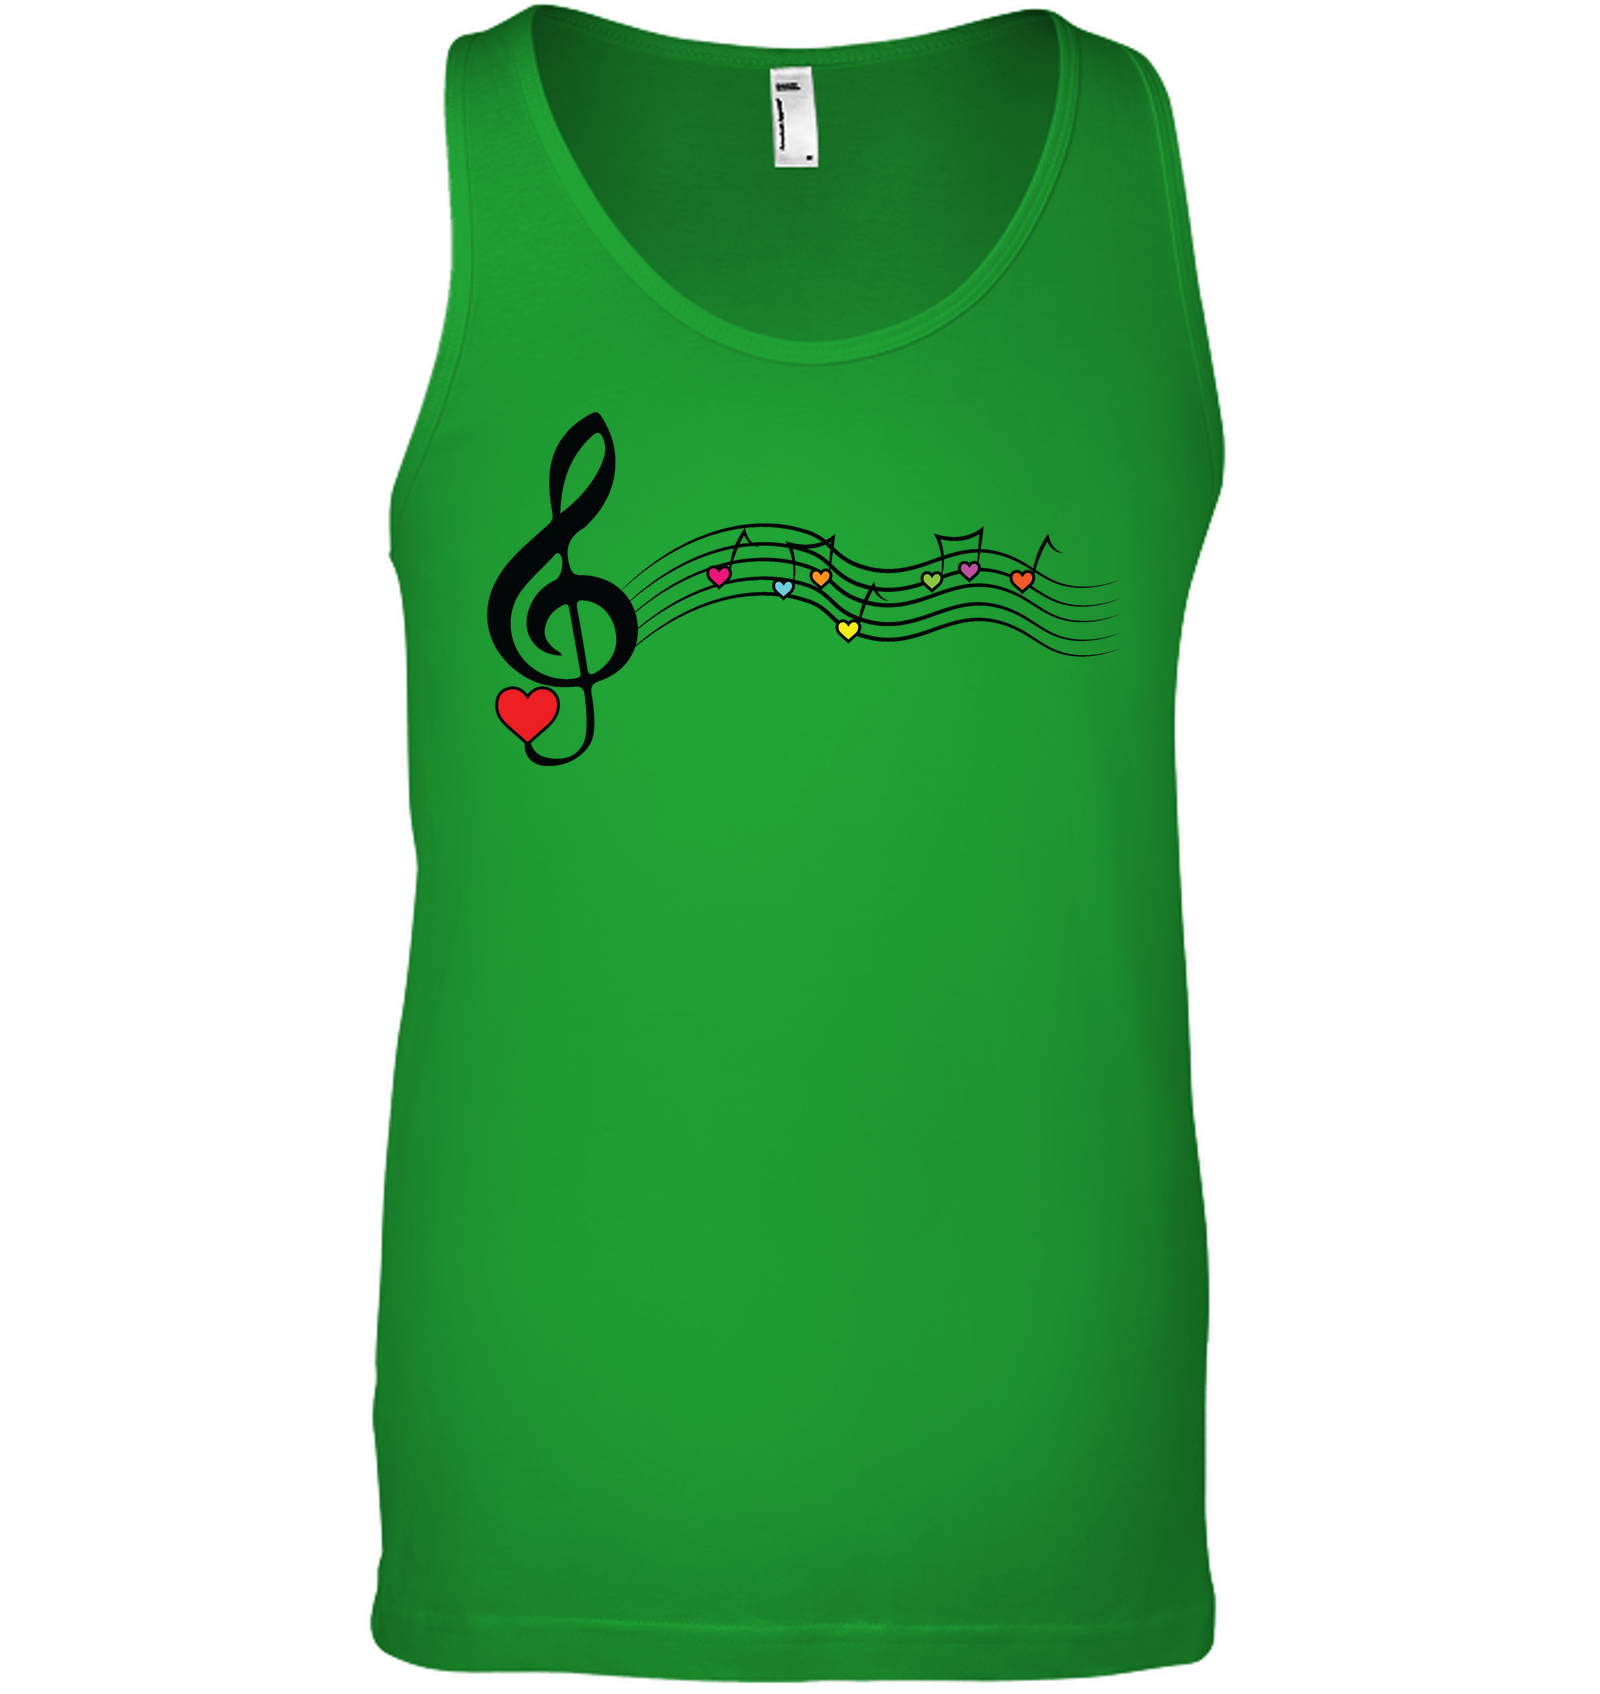 Musical Waves, Heart Notes and Colors - Bella + Canvas Unisex Jersey Tank